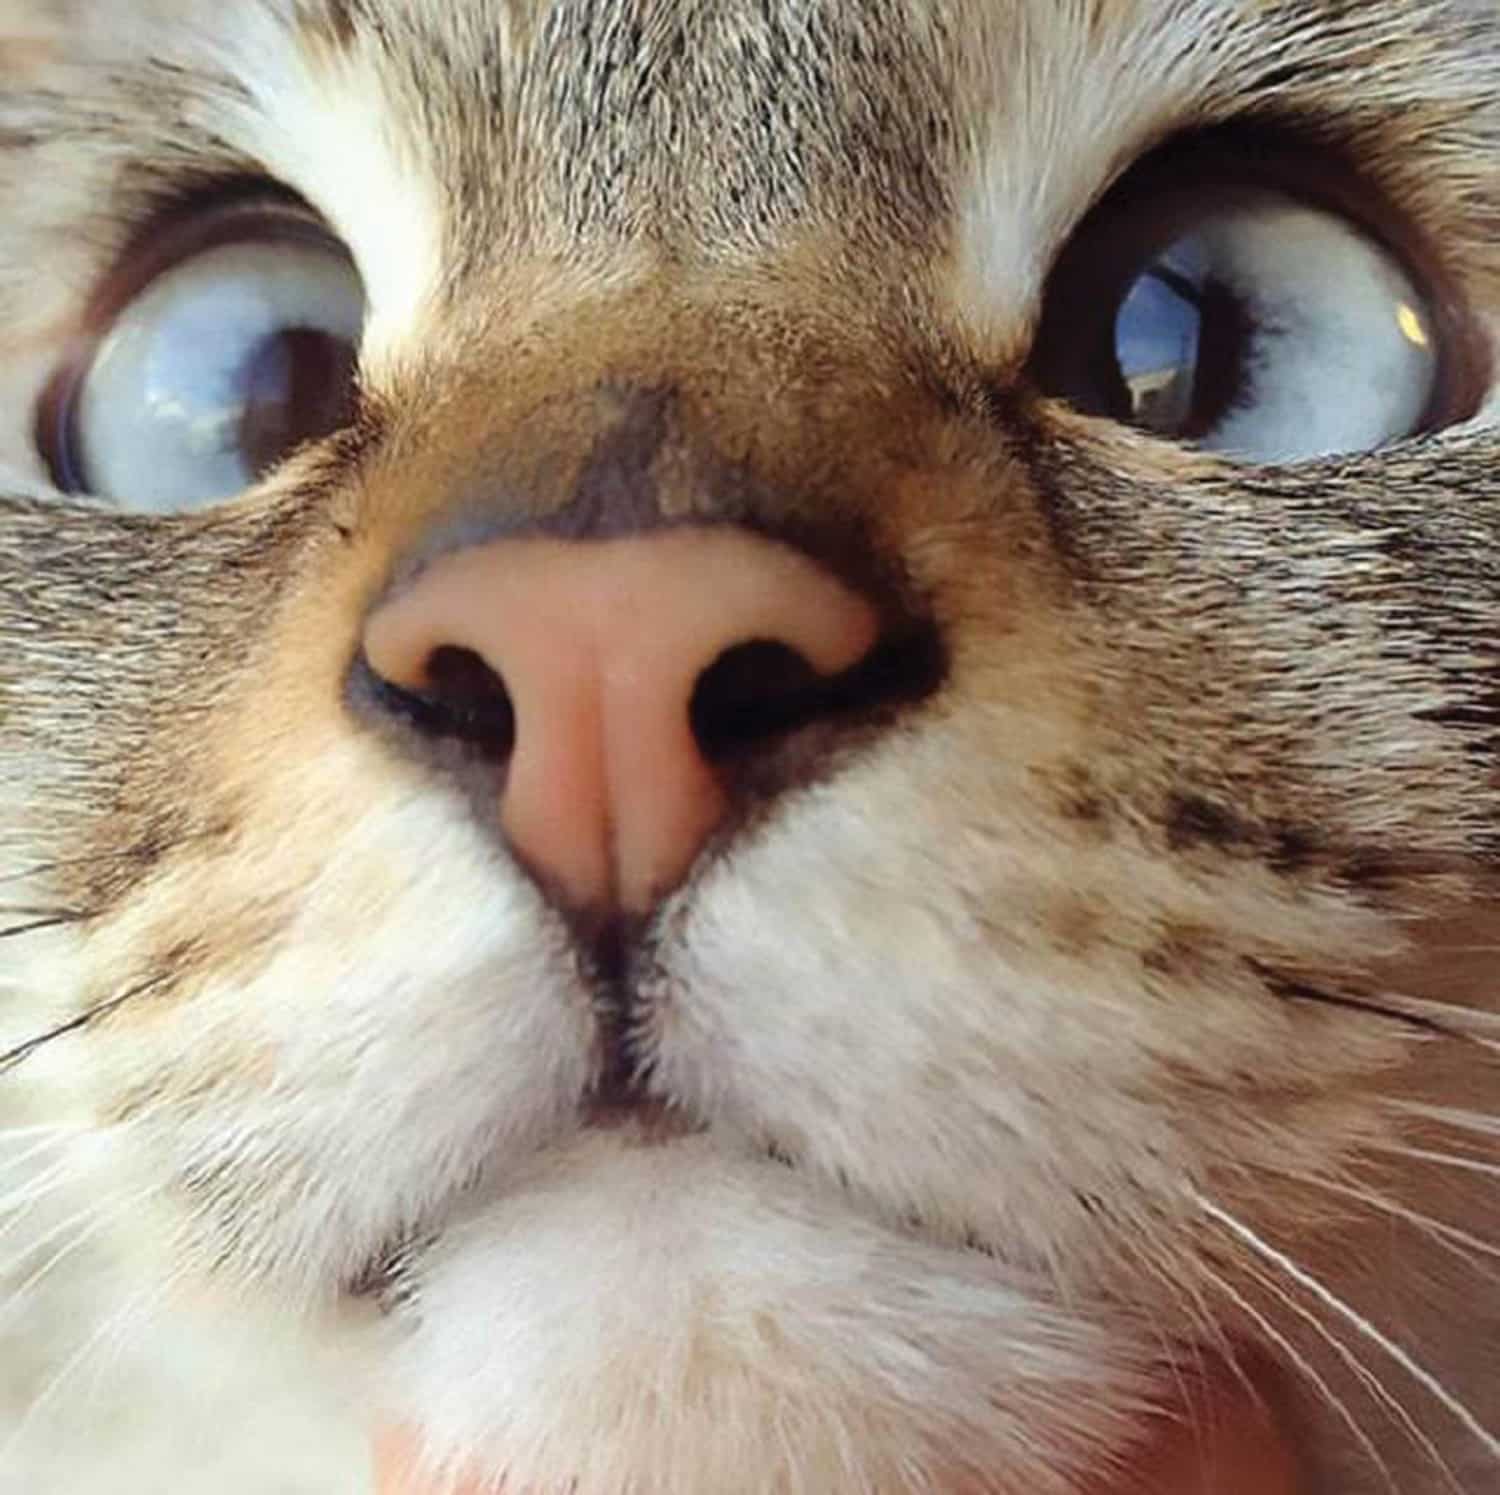 Cross-eyed cat melts the internet with its adorable peepers